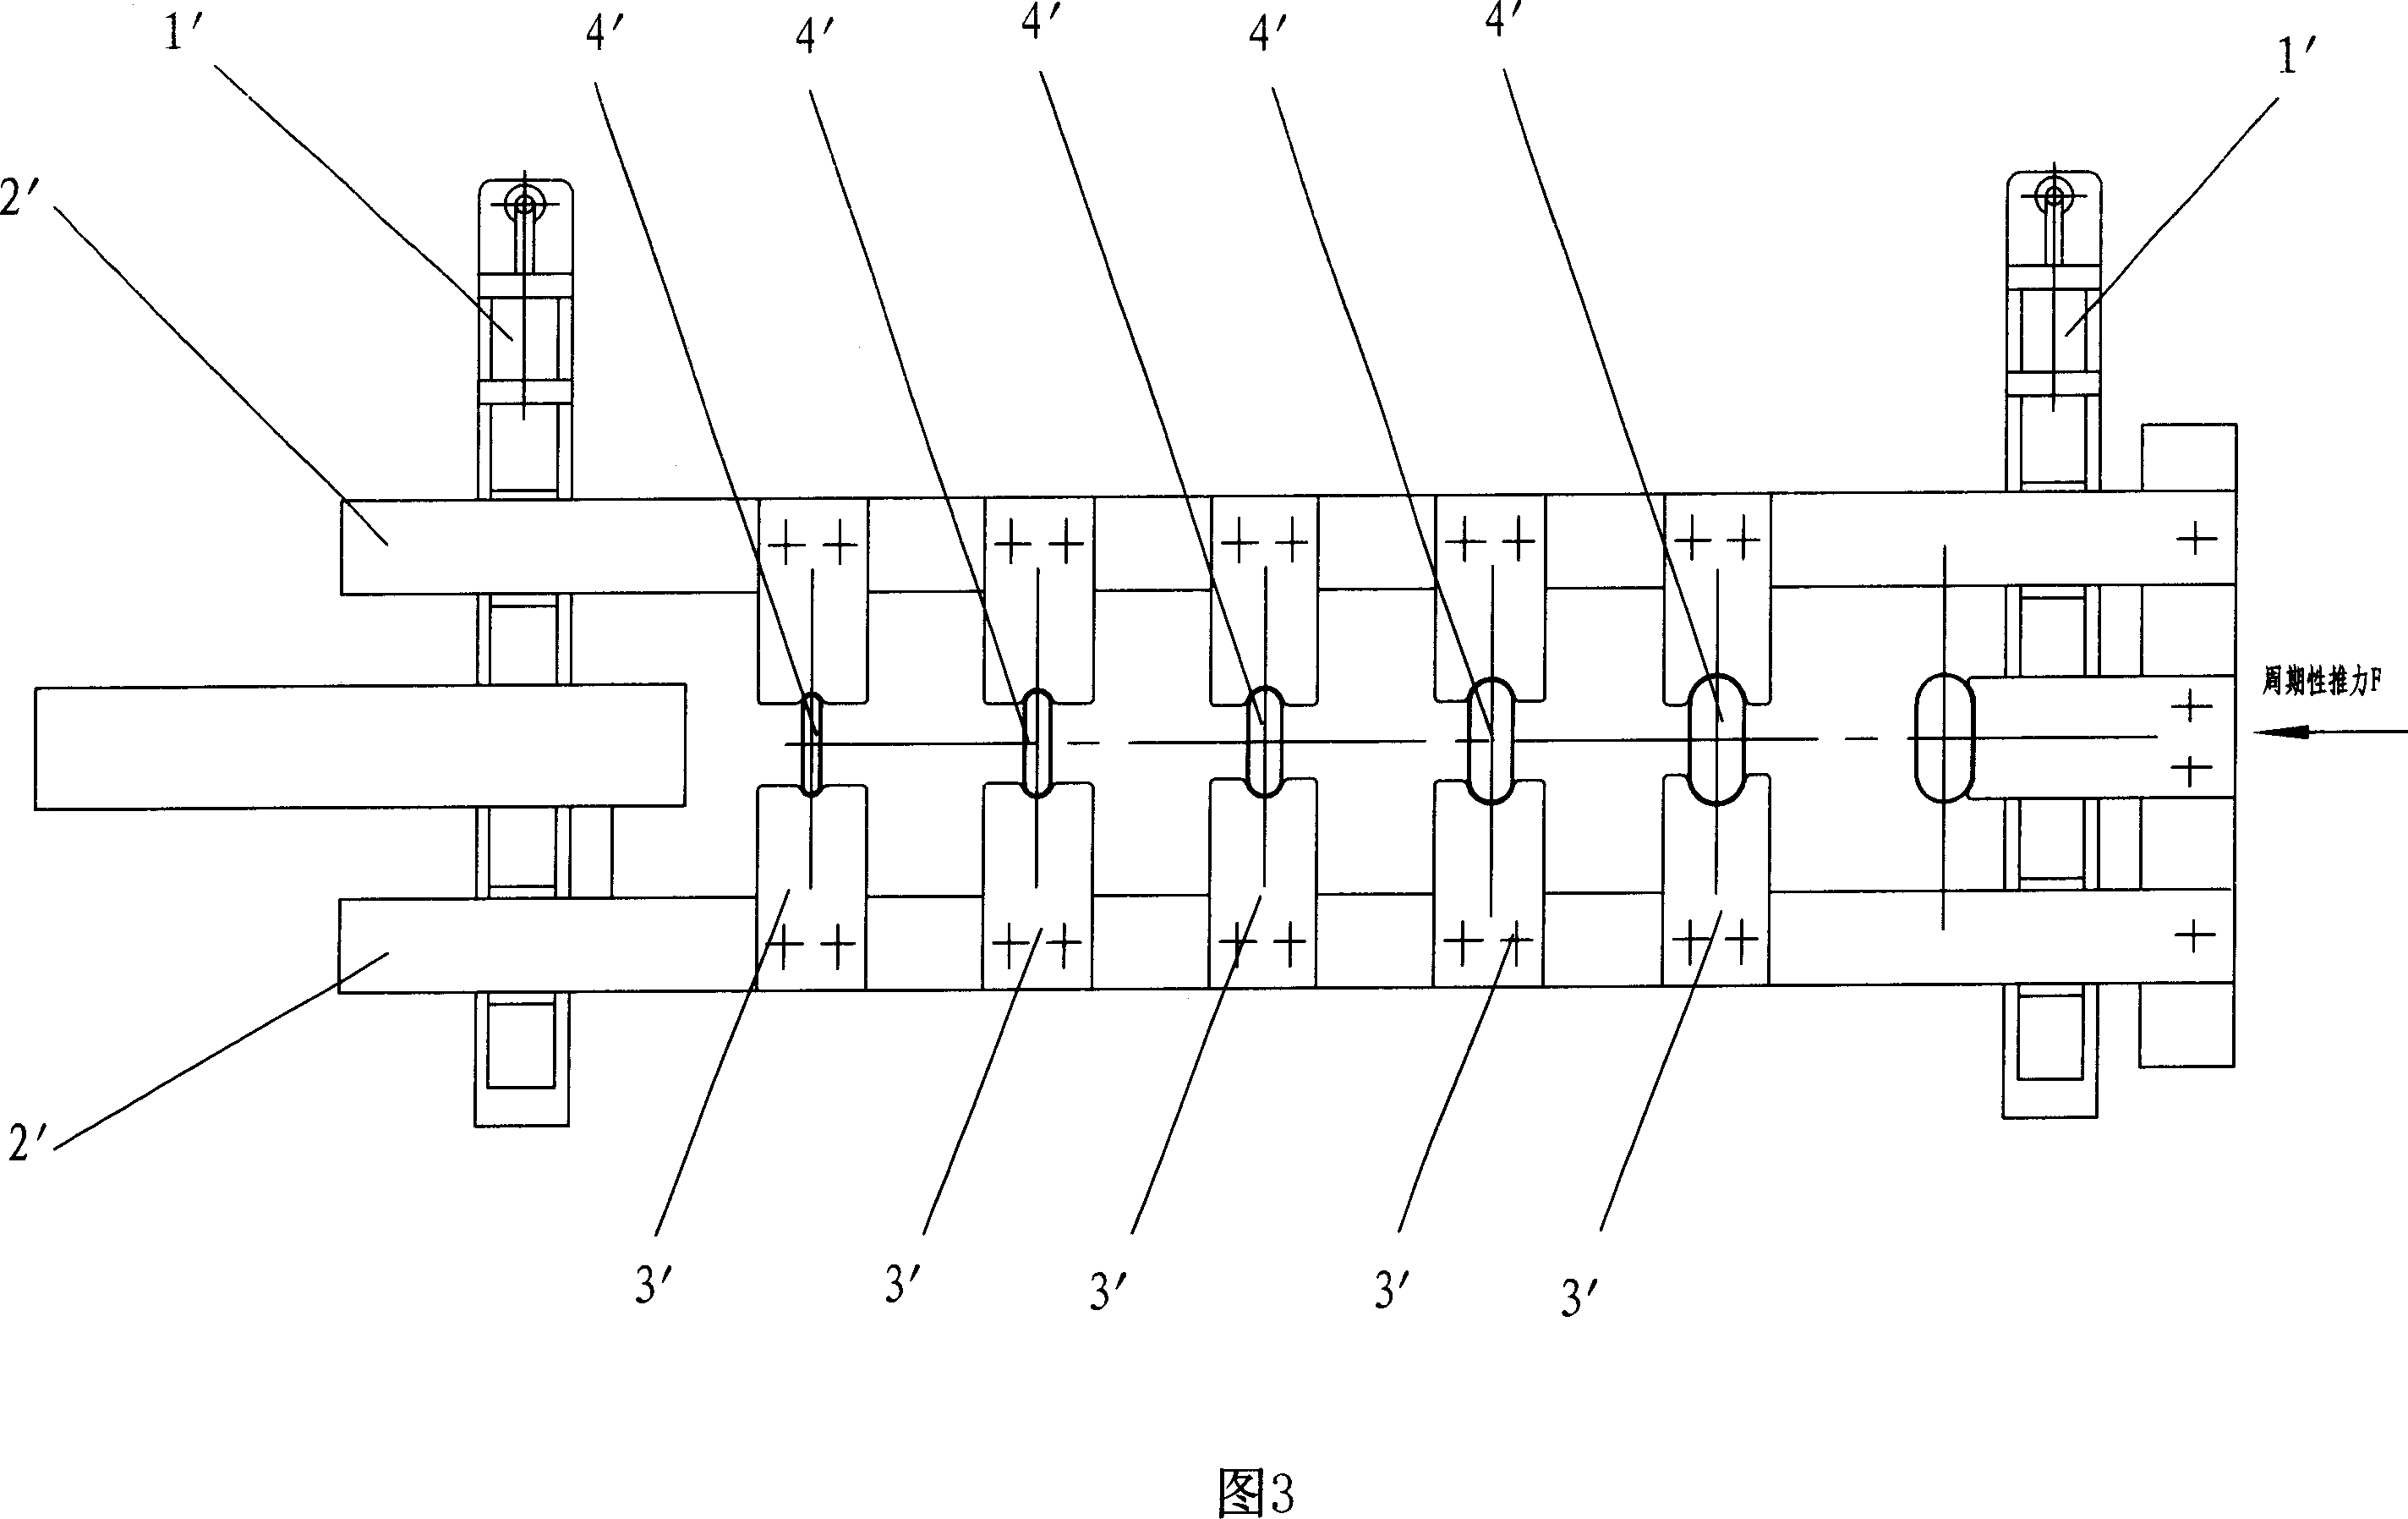 Feeding method for multiple site punching of drawn hardware piece